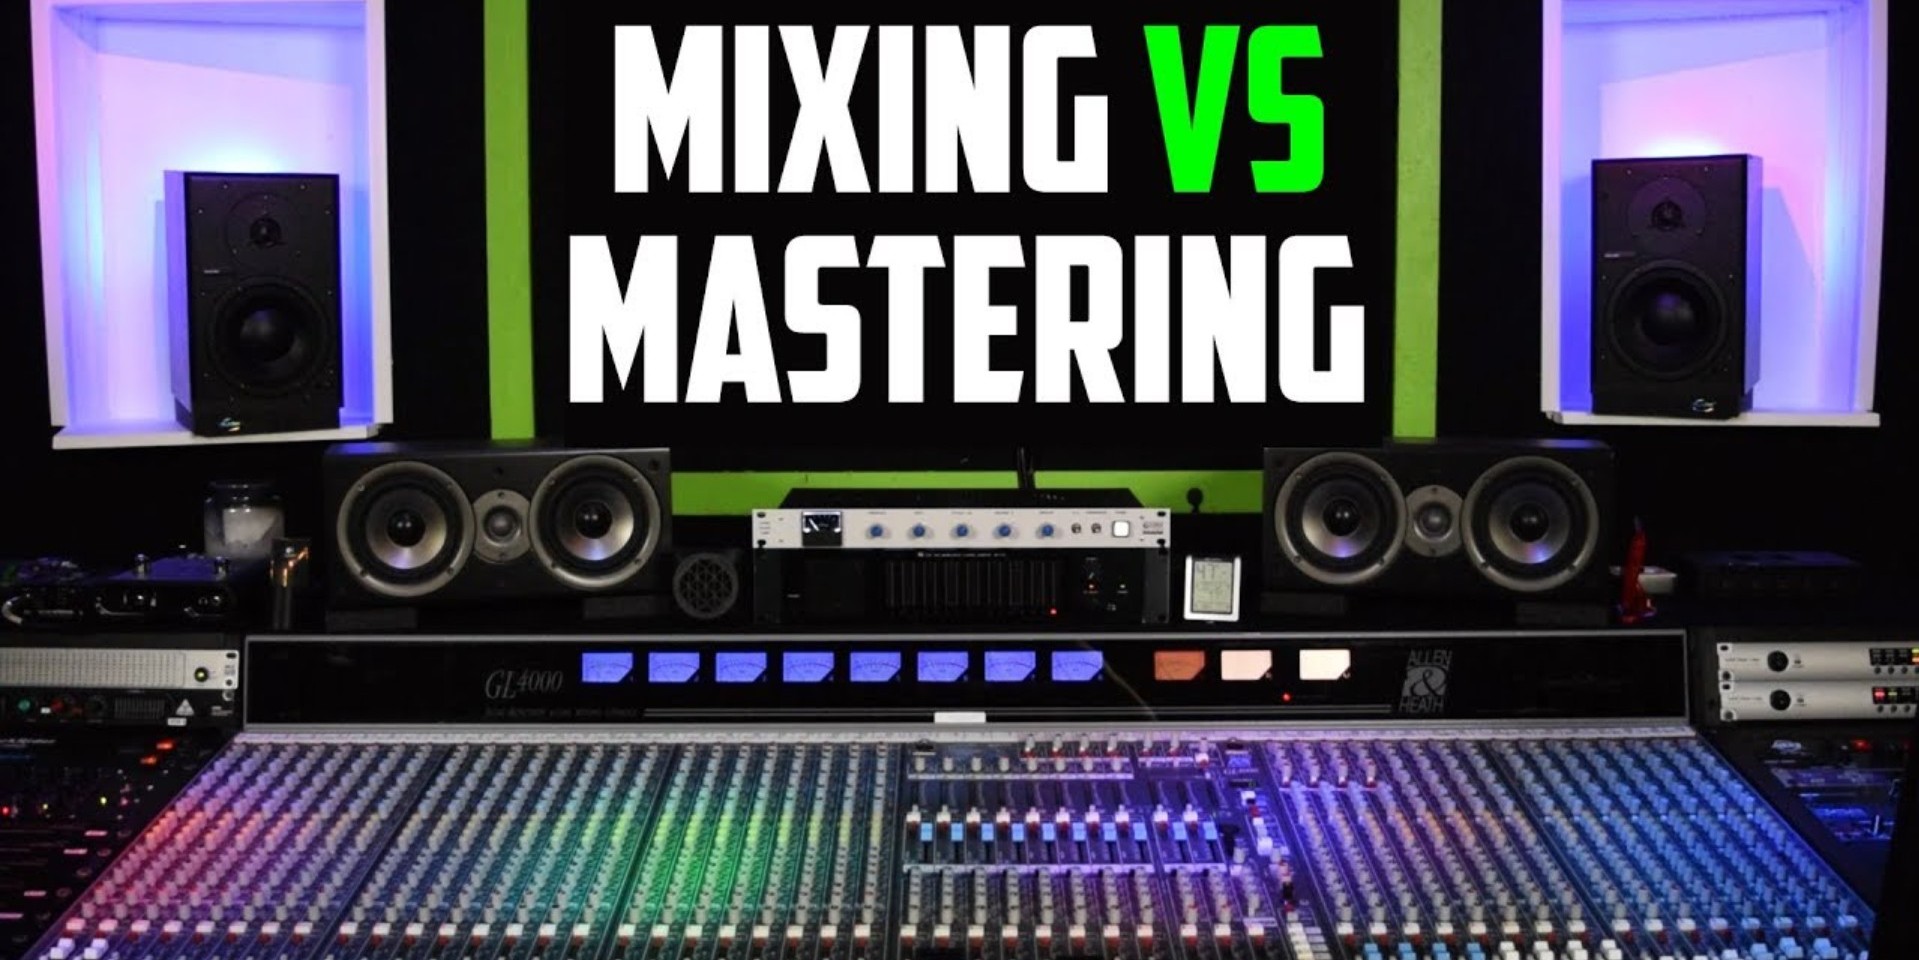 What is the difference between mixing and mastering